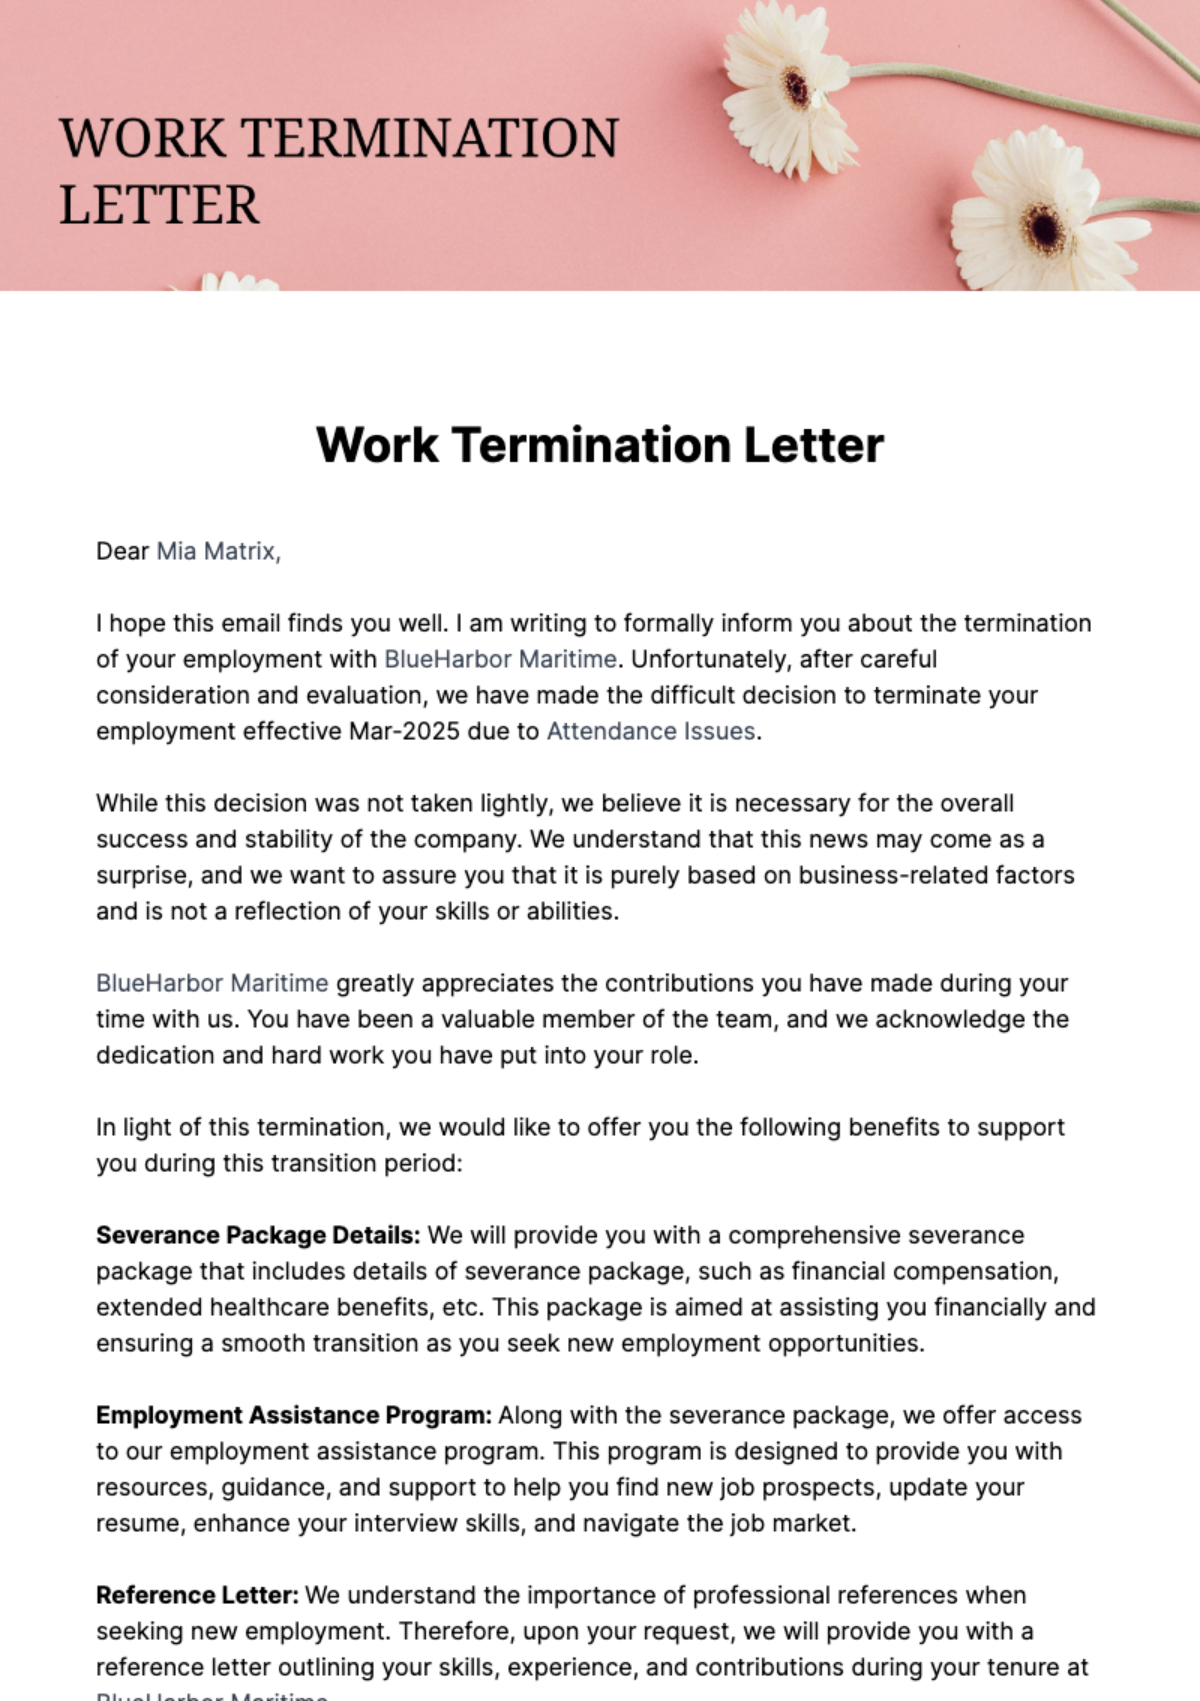 Work Termination Letter Template